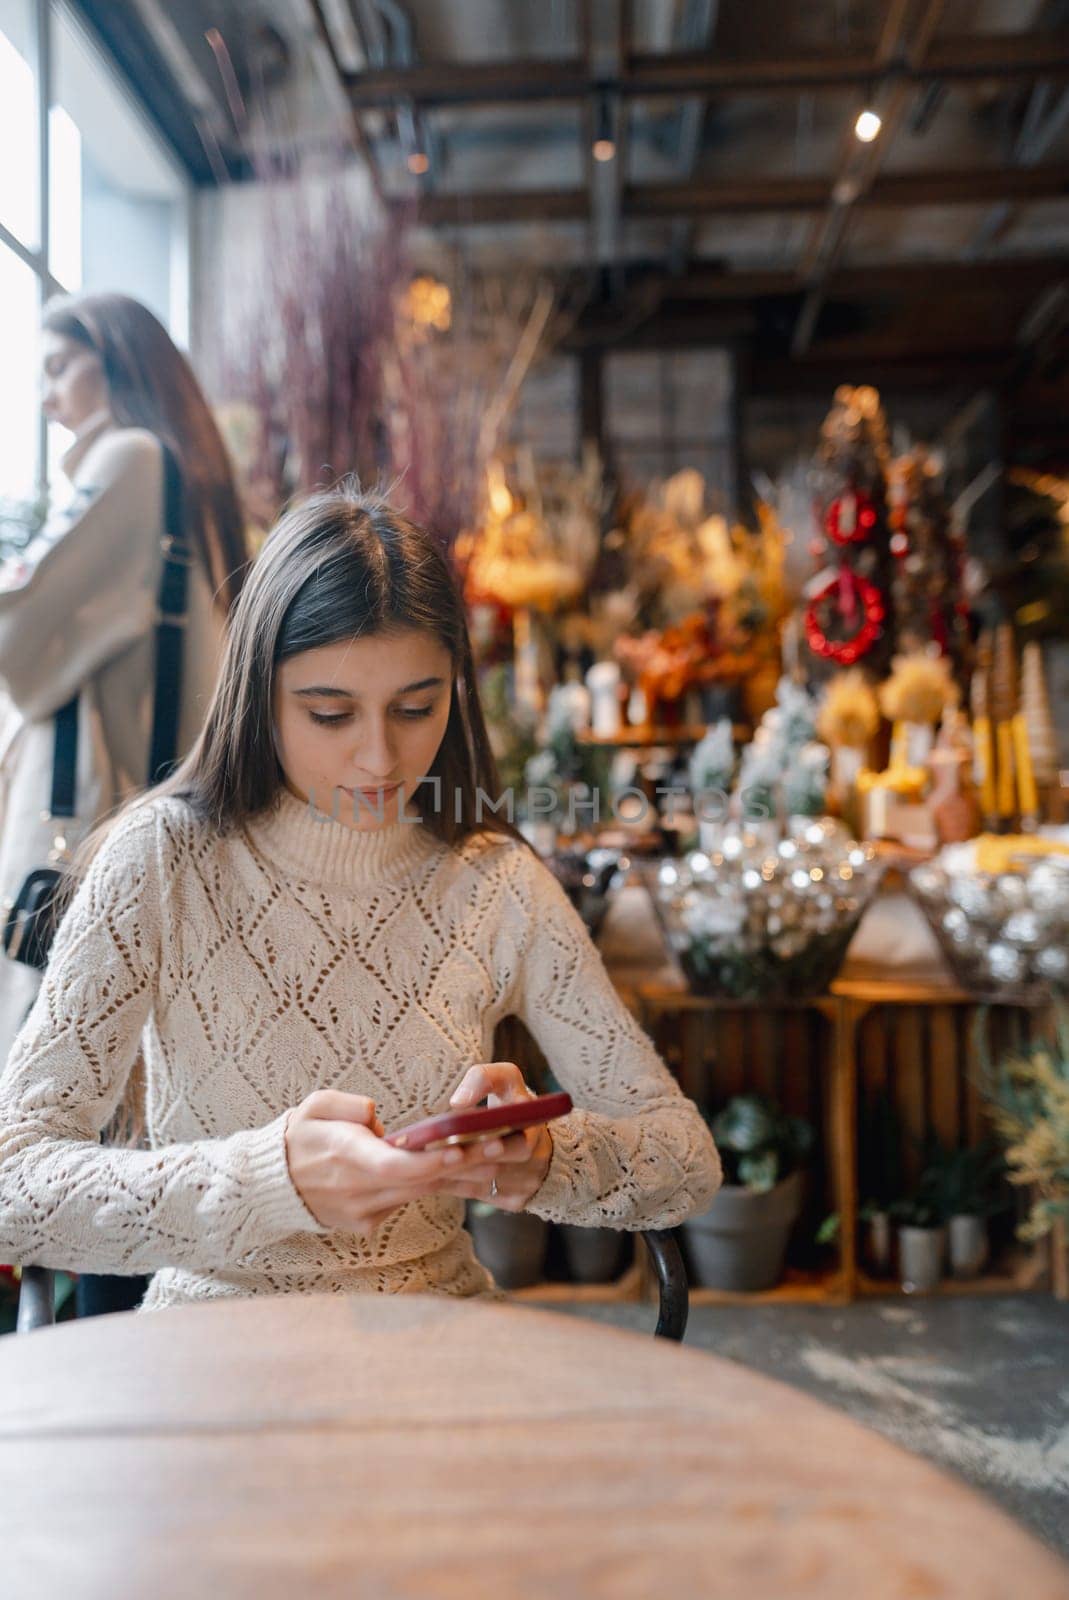 With a phone in hand, a young lady browses the decor shop. by teksomolika